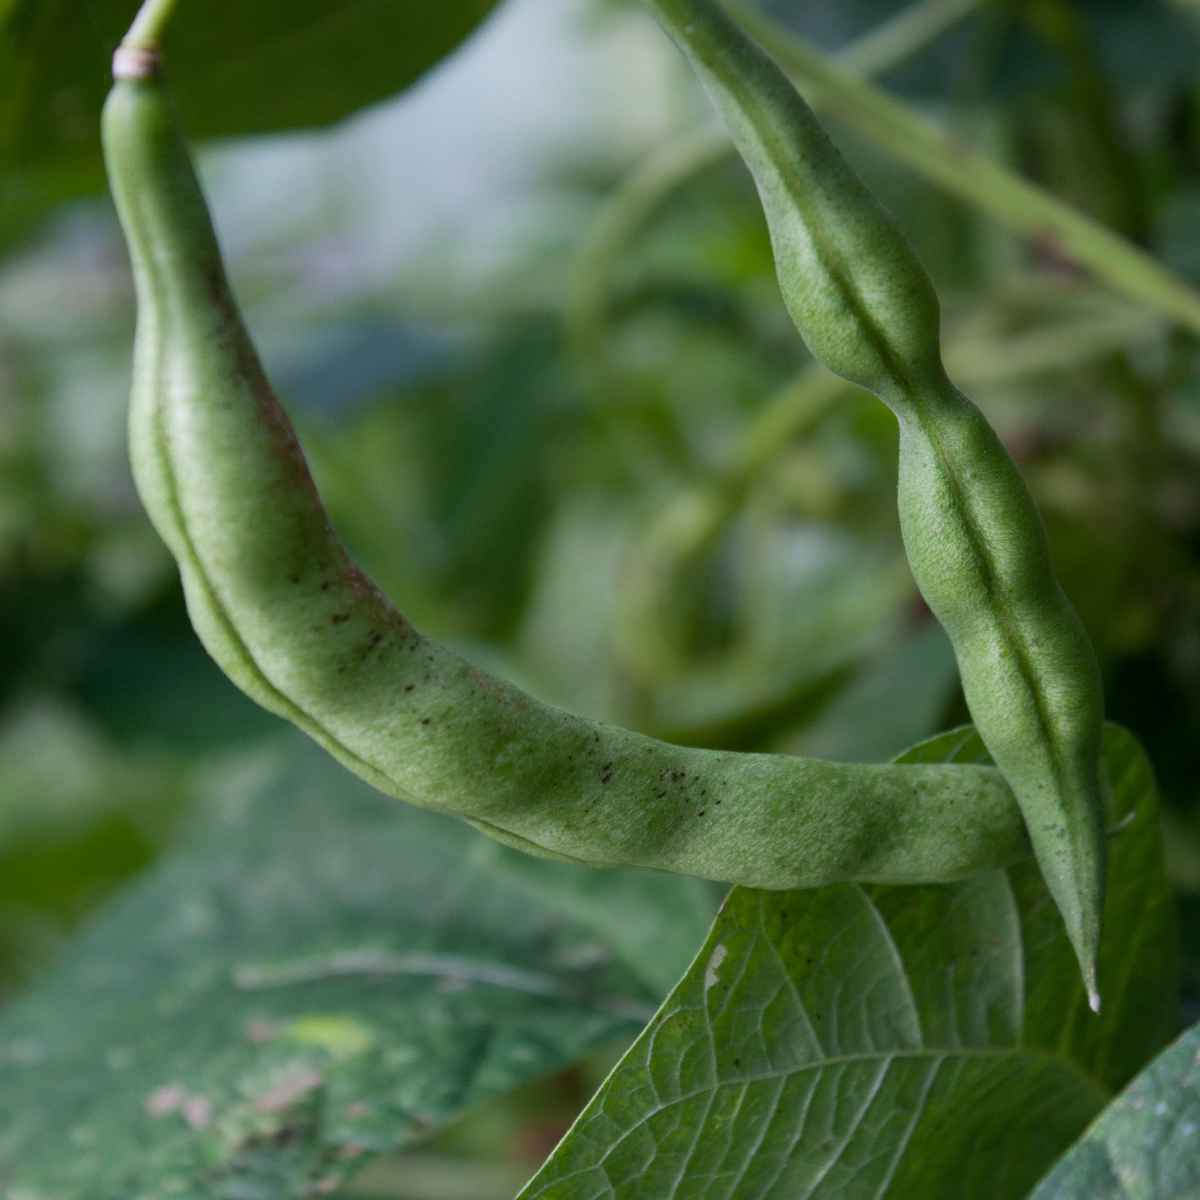 How the weather can affect your bean production